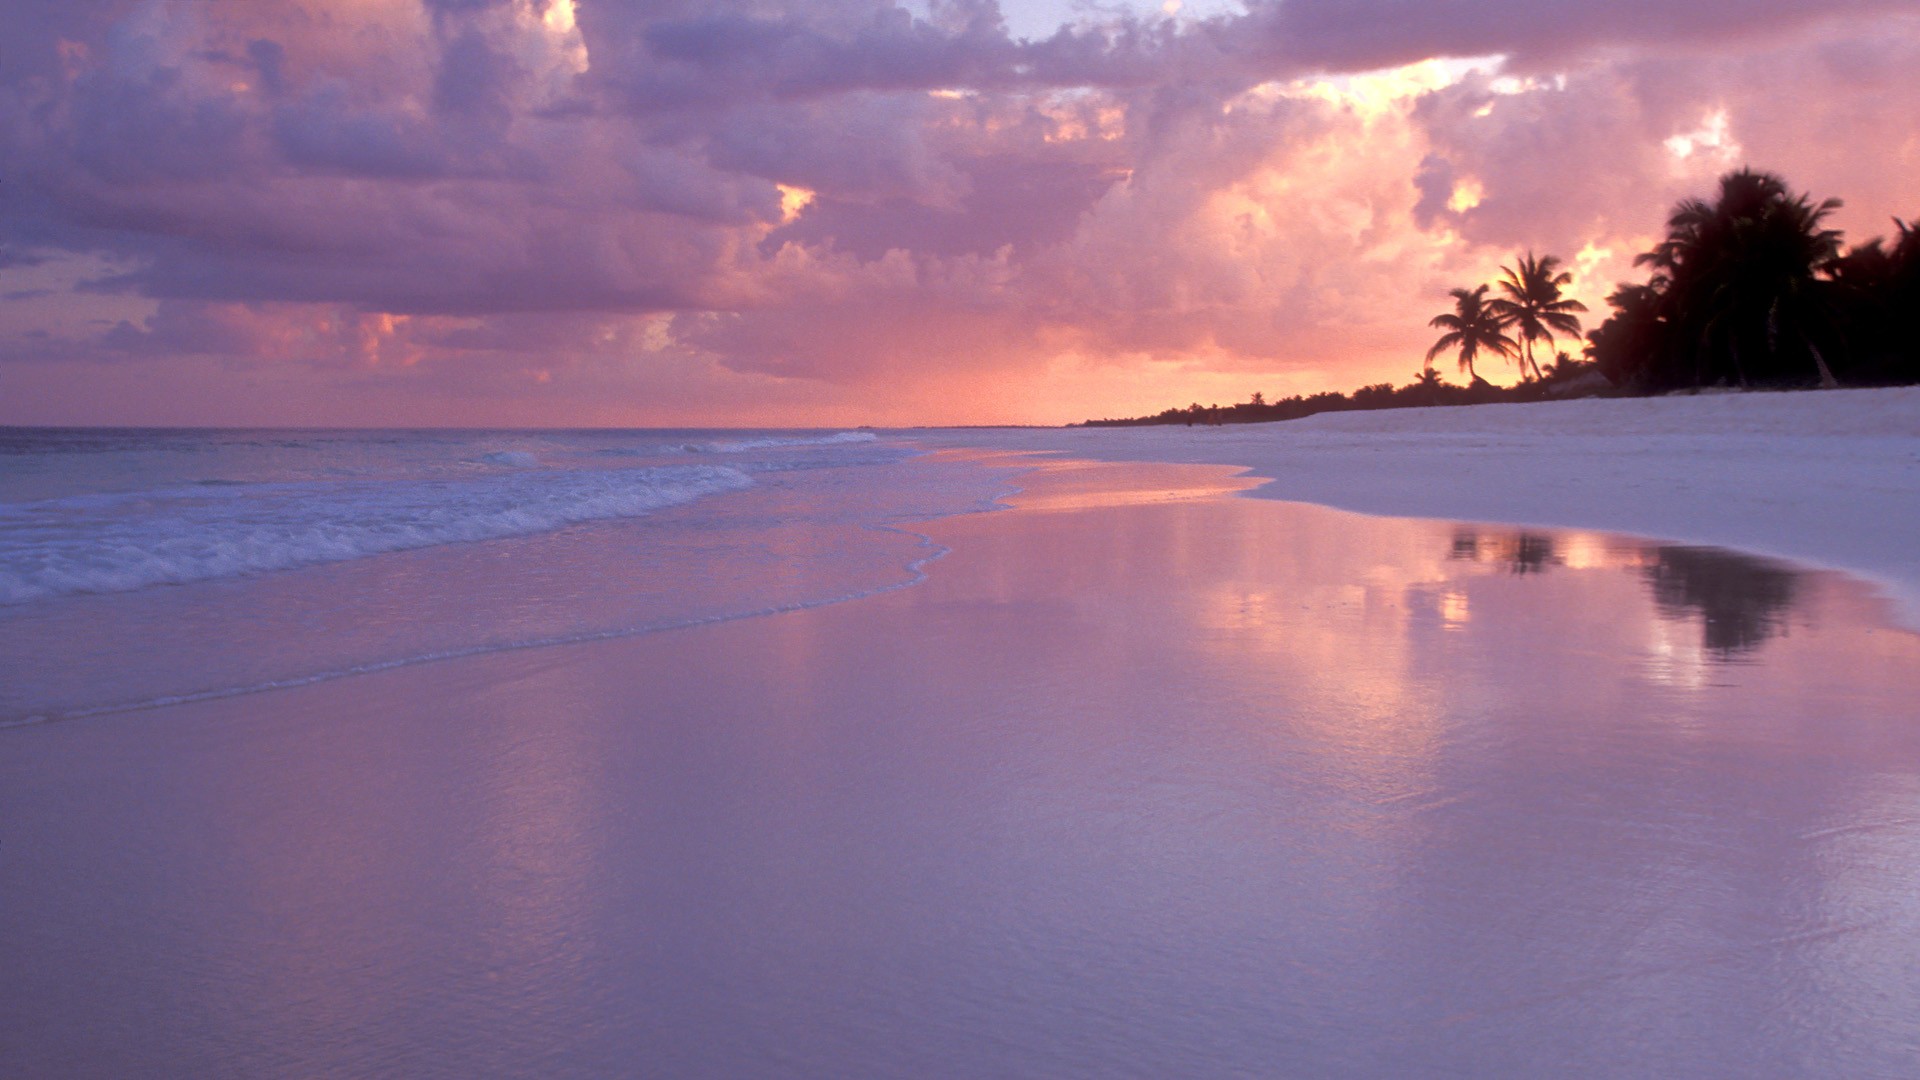 Colorful Beach Sunset In Cancun Mexico Widescreen Wallpaper